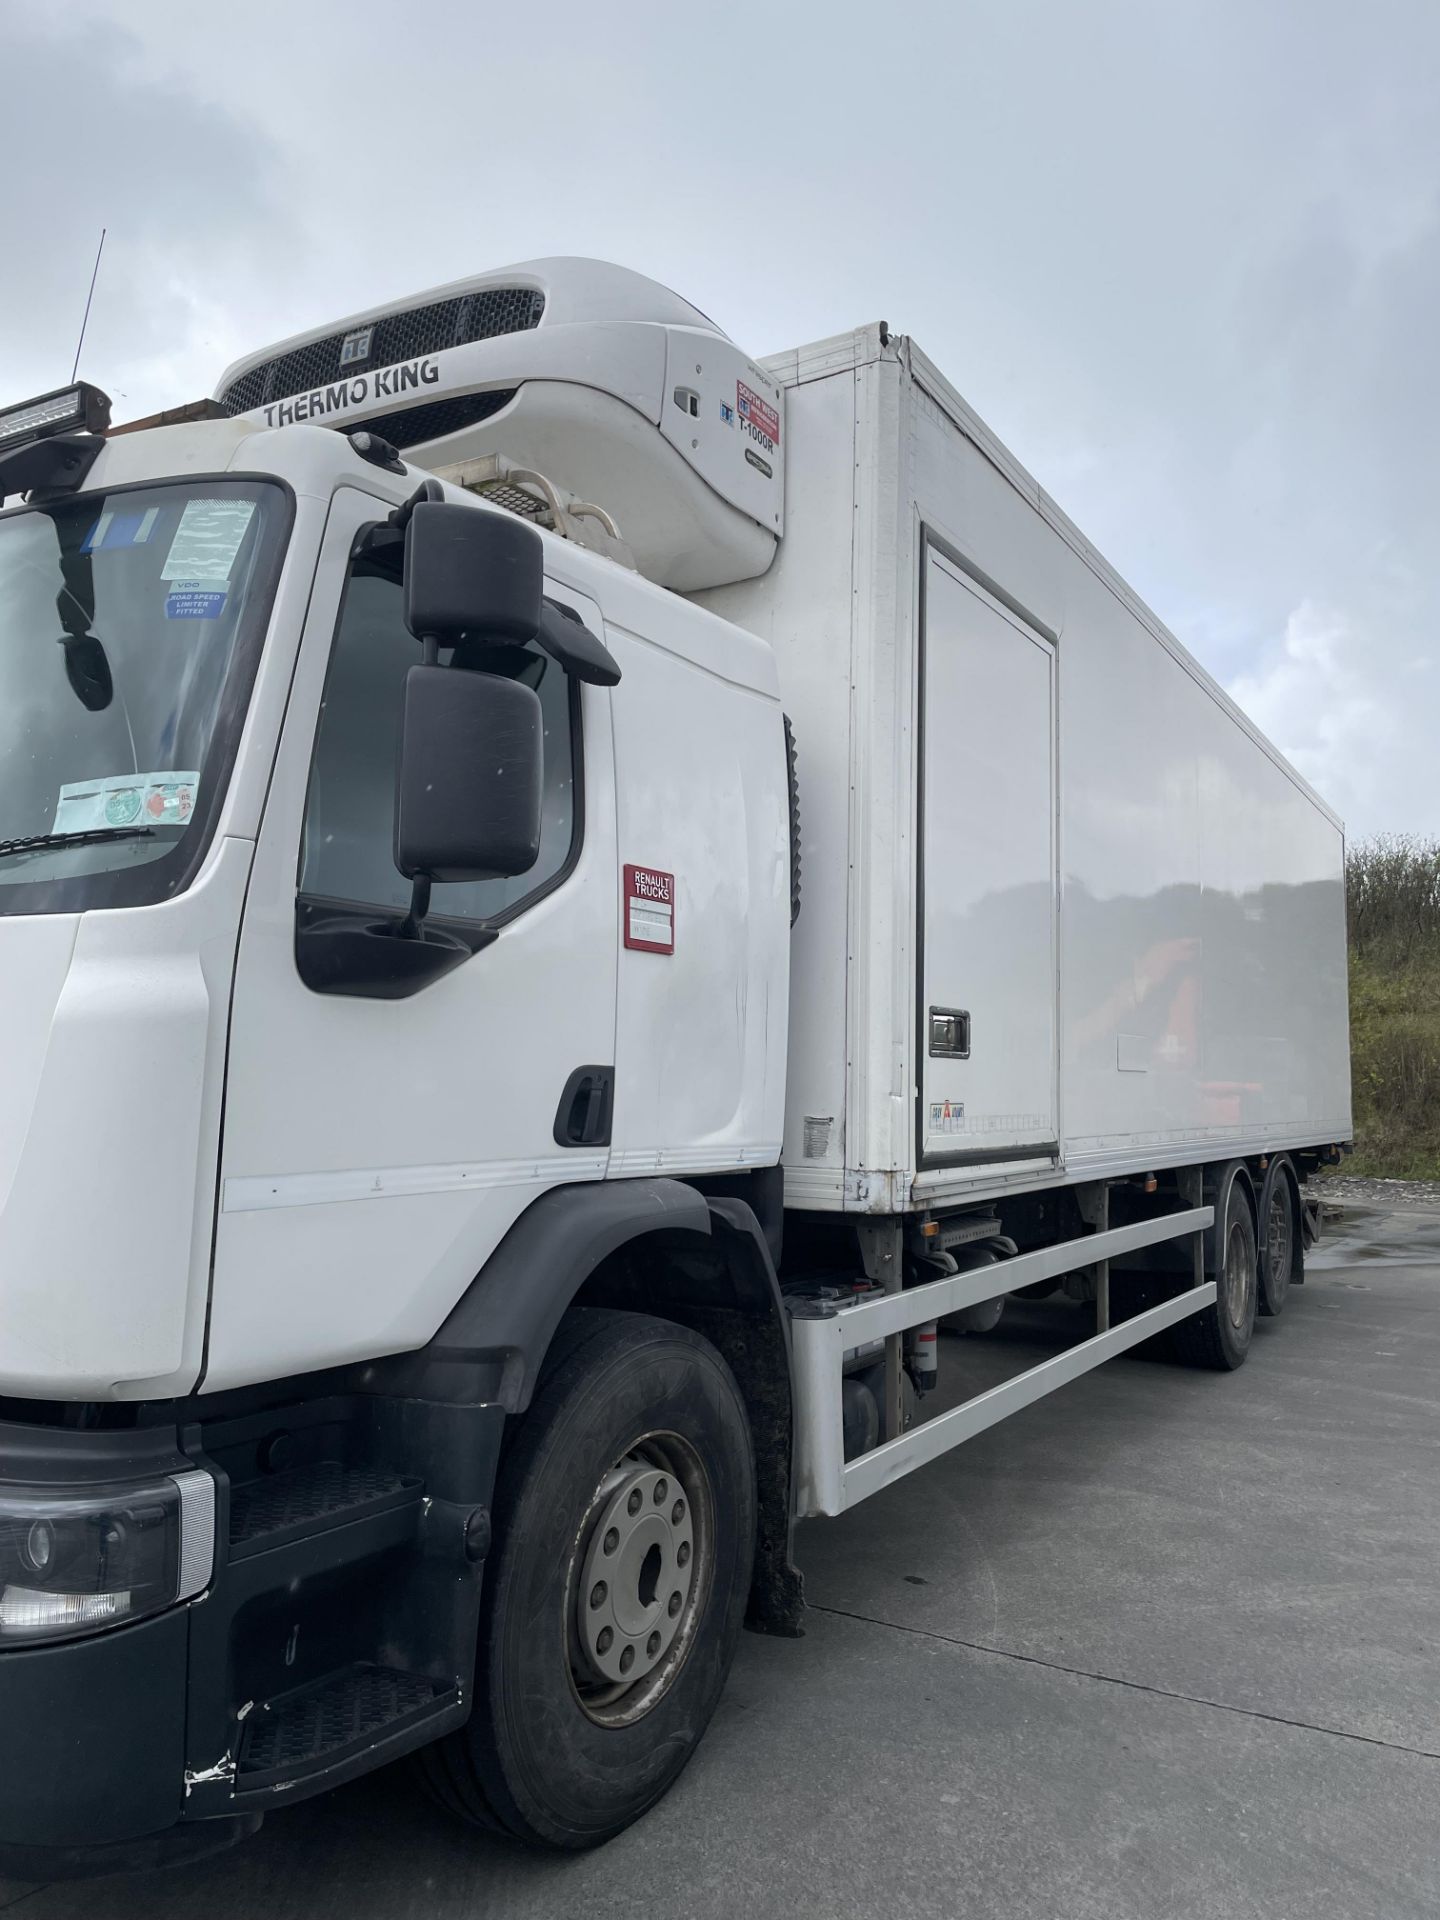 RENAULT REFRIGERATED TRUCK. 30 FT - REG 152 0Y 1062 - Image 4 of 5